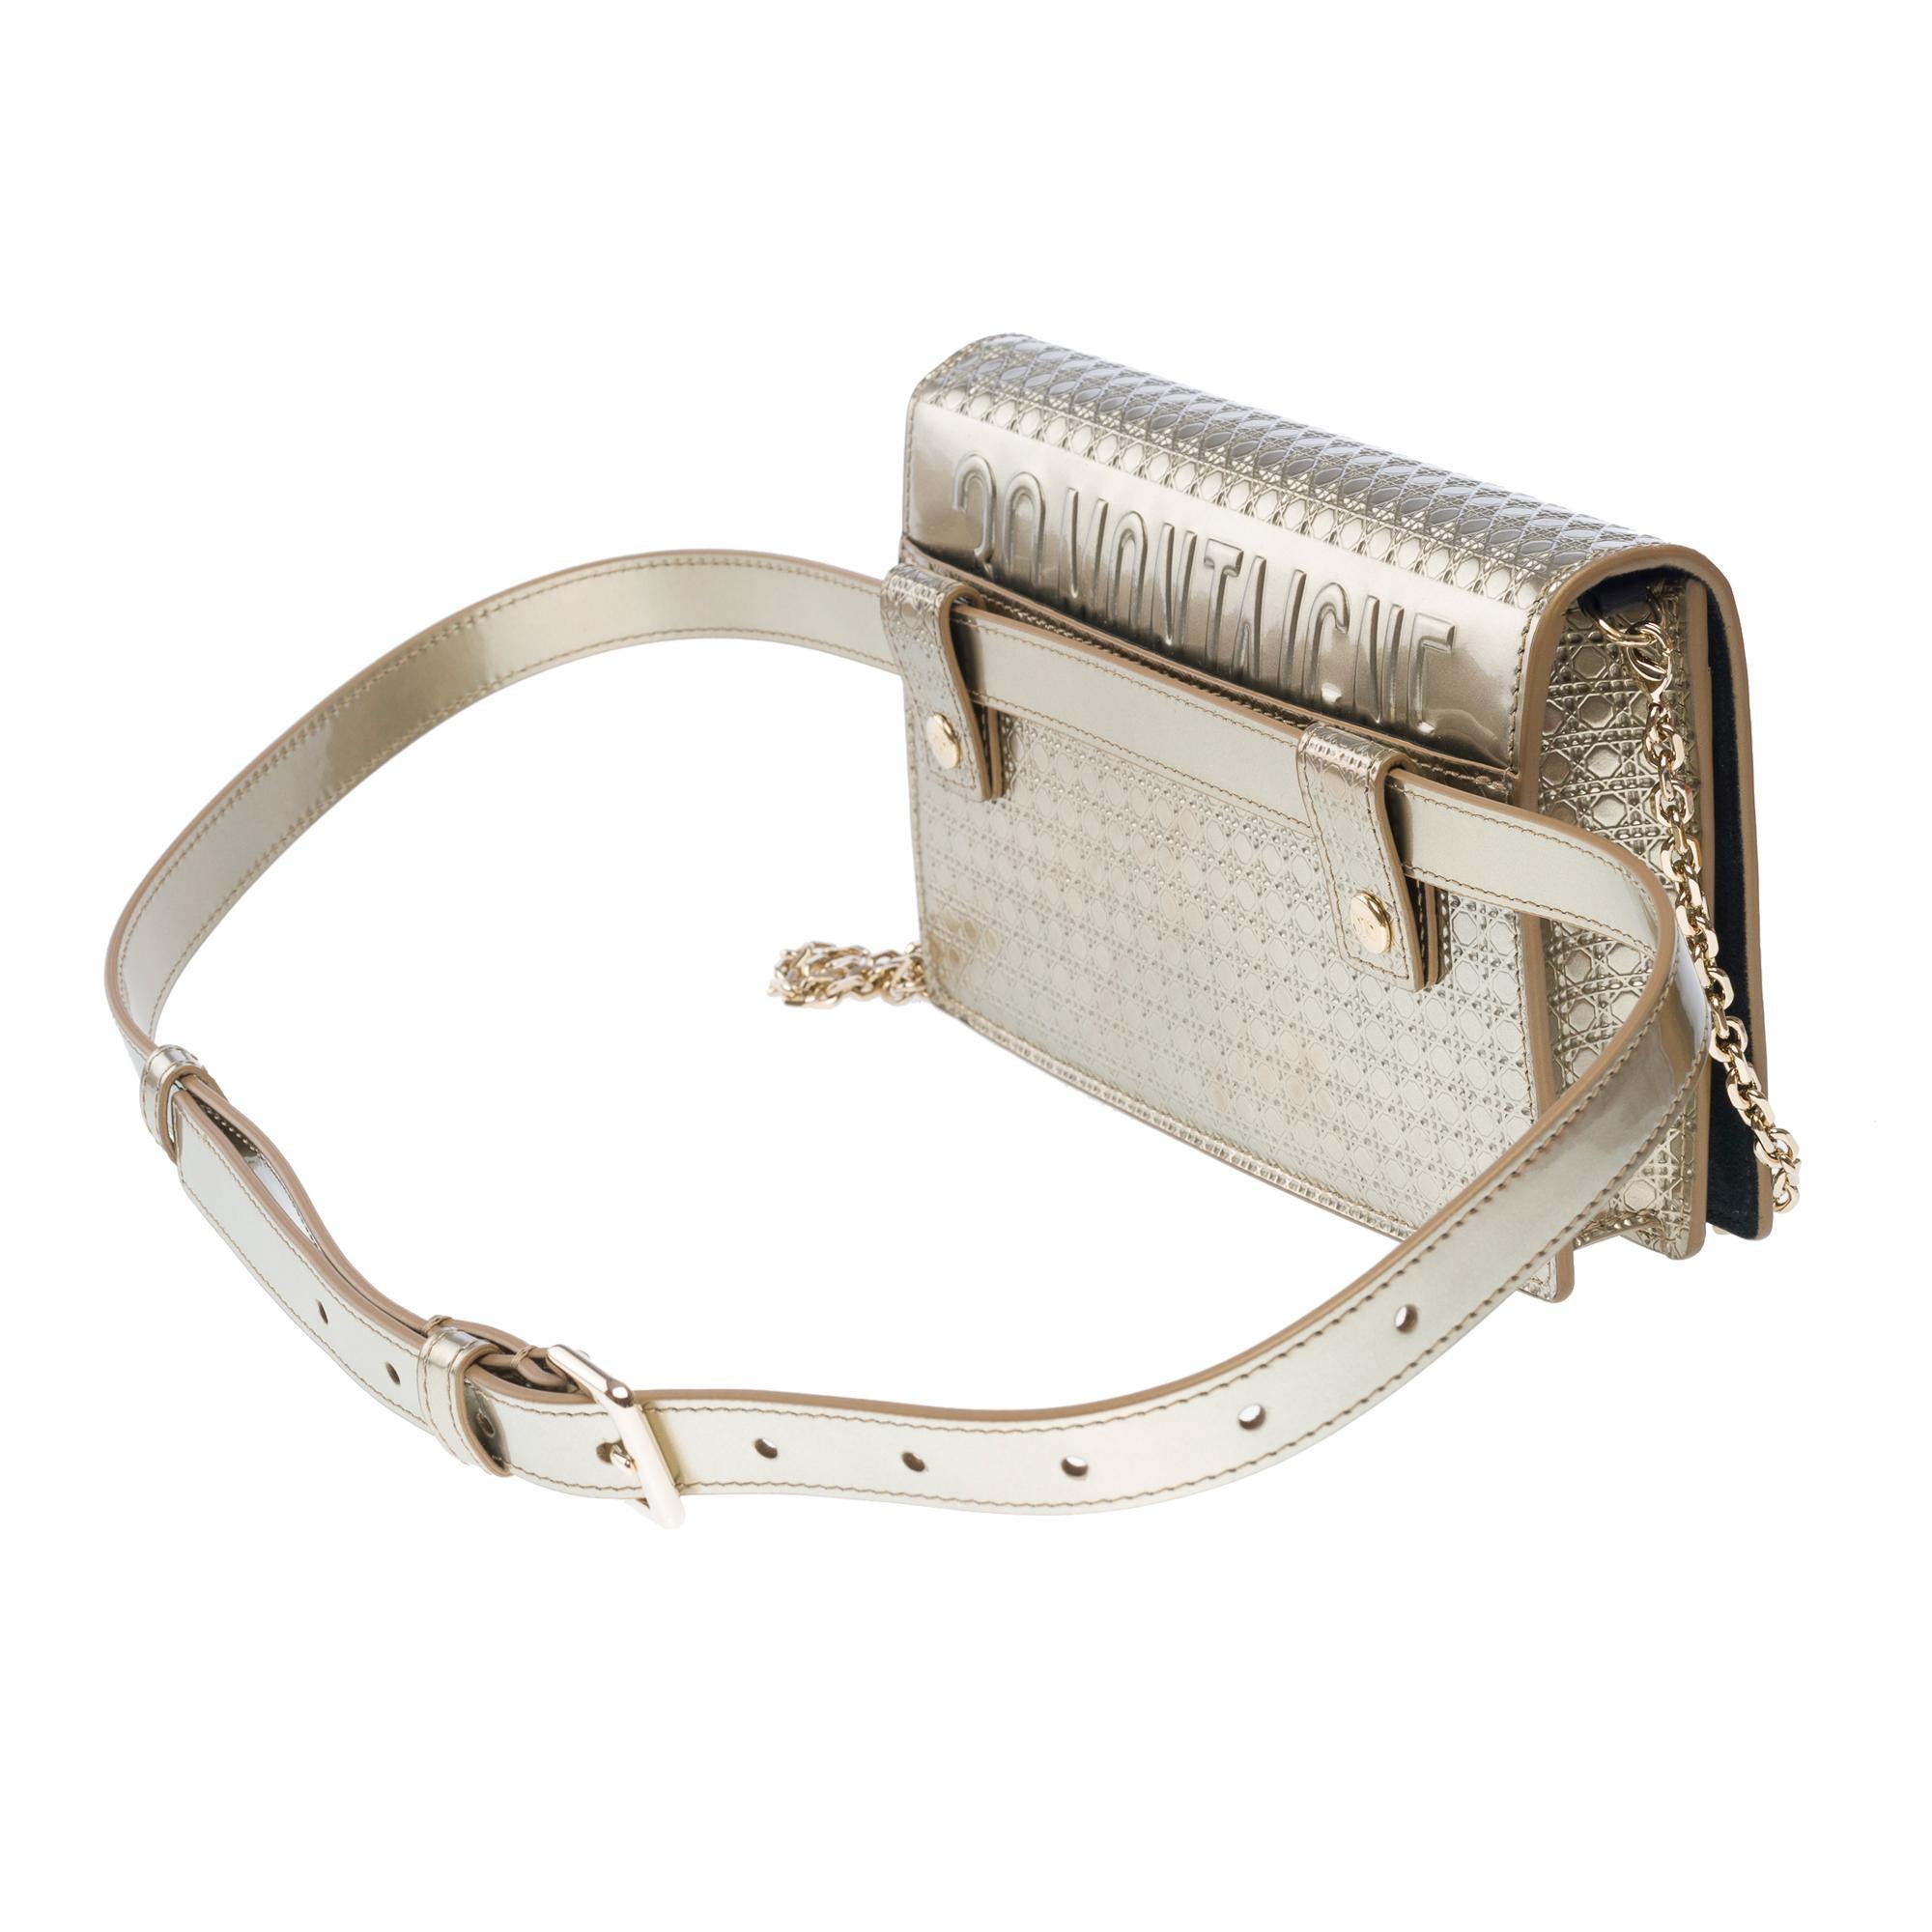 Christian Dior shoulder&belt bag 2 in 1 30 Montaigne in silver leather 3